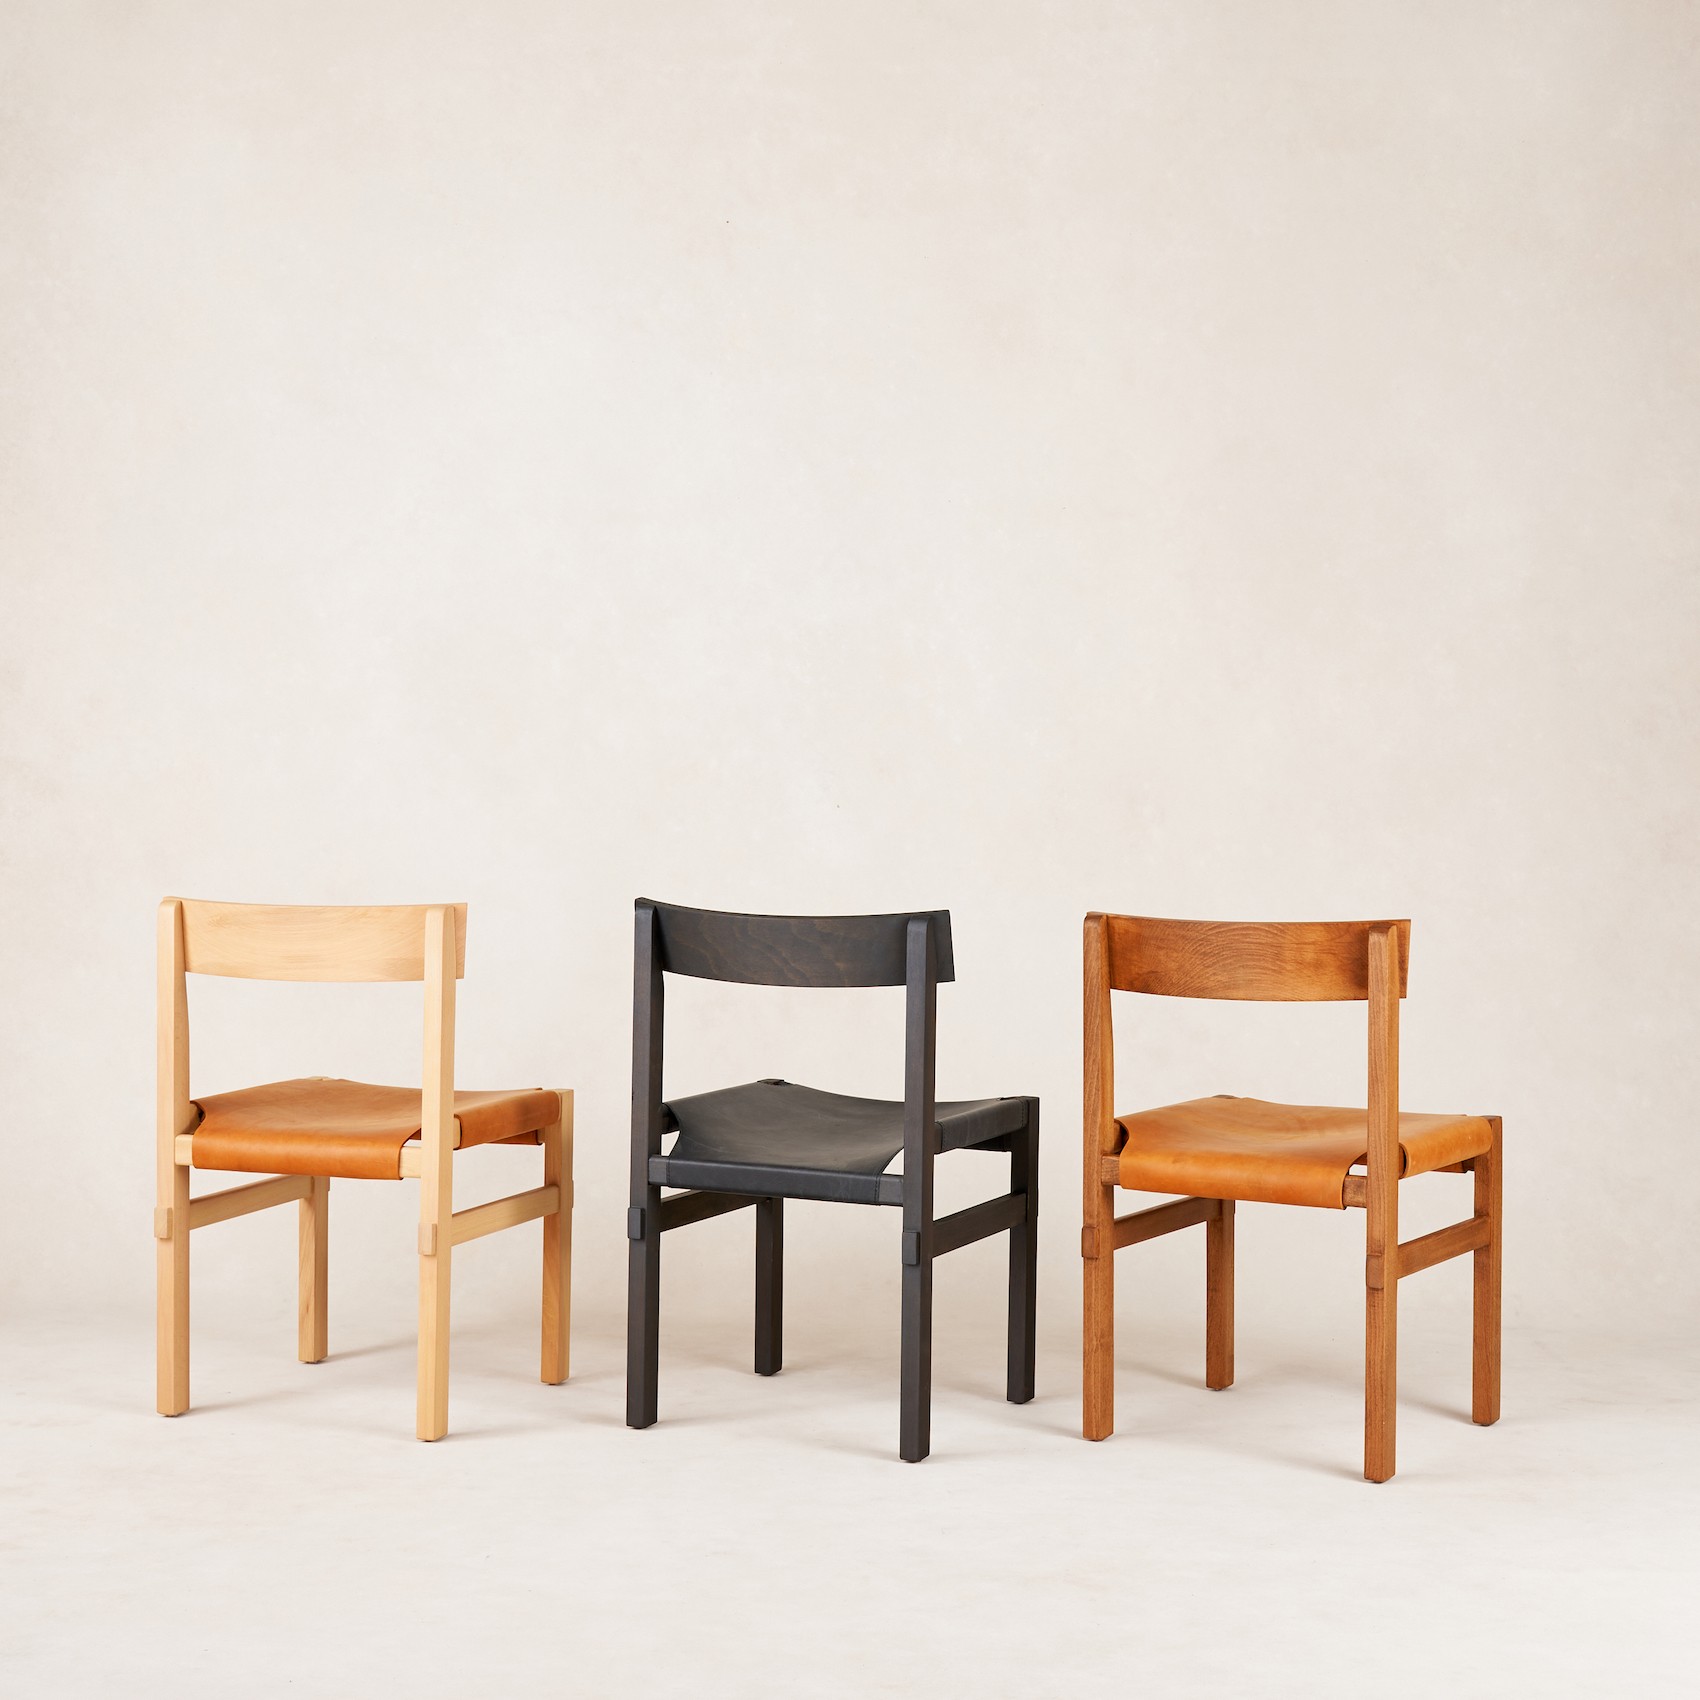 a group of three chairs sitting next to each other